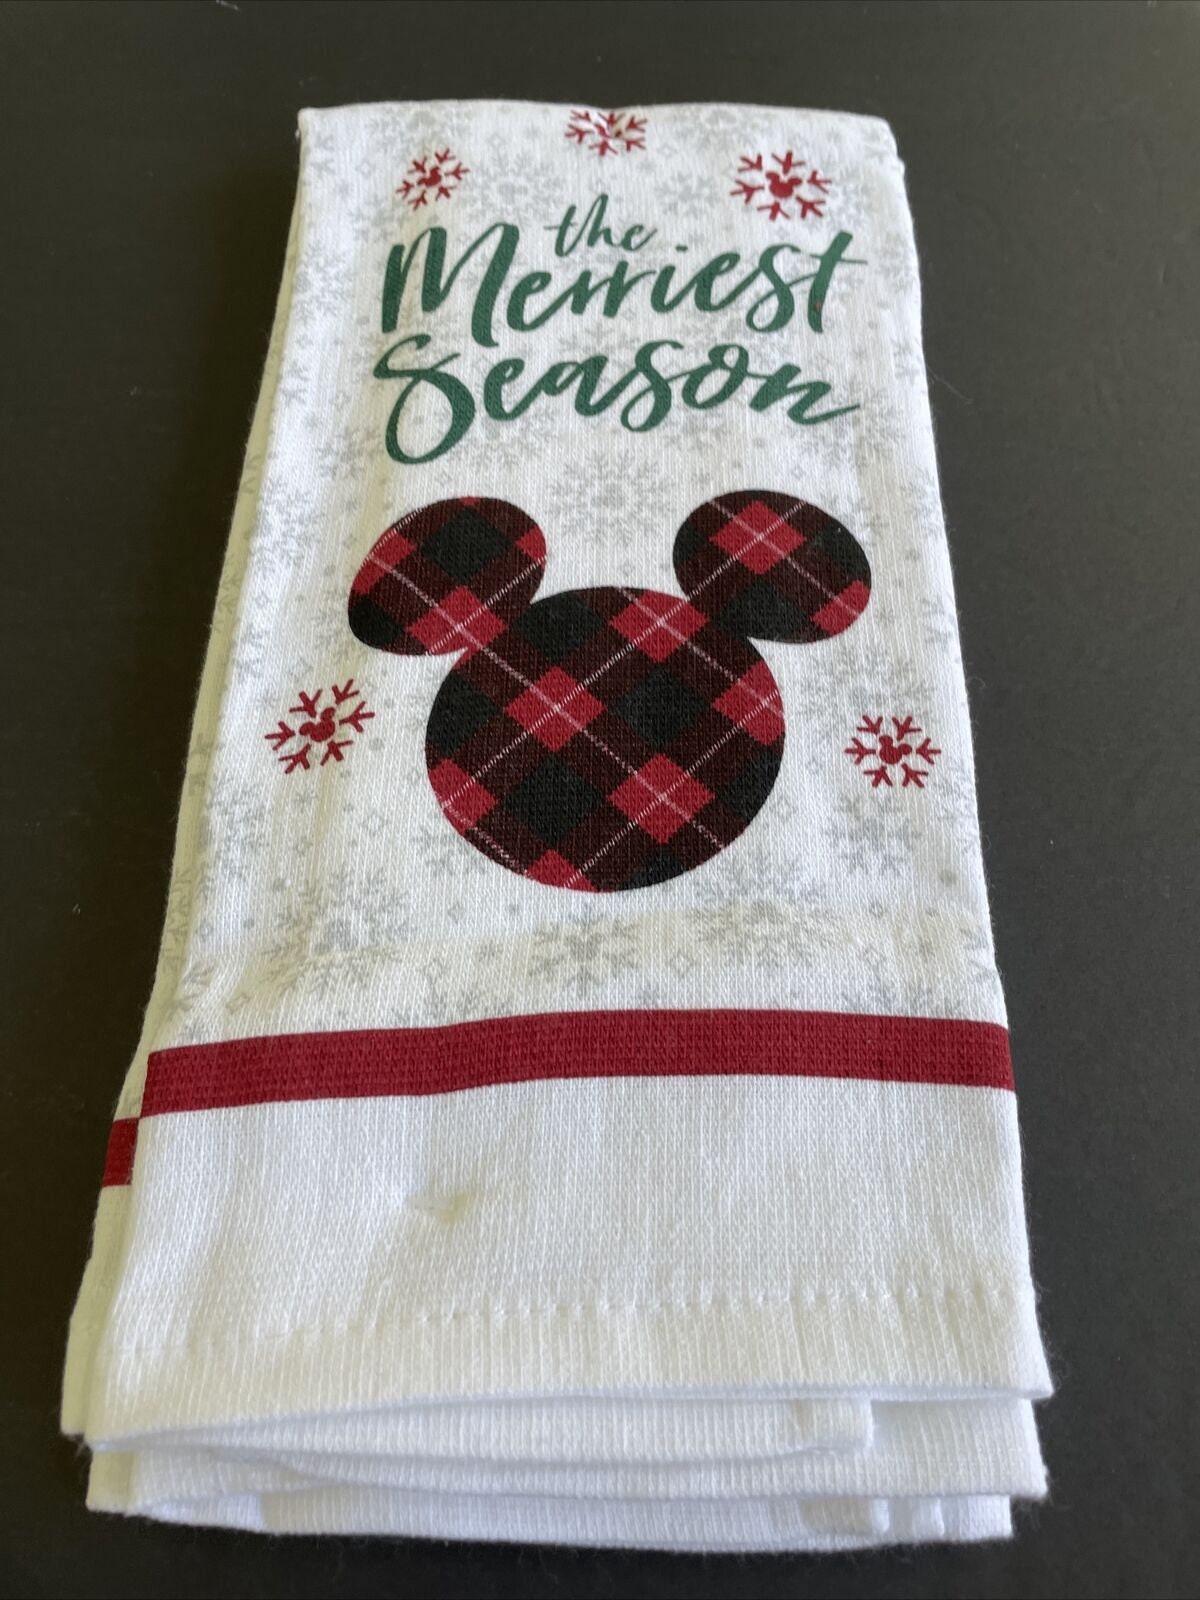 Disney Mickey Mouse Themed Christmas Holiday Kitchen Dish Hand Towels